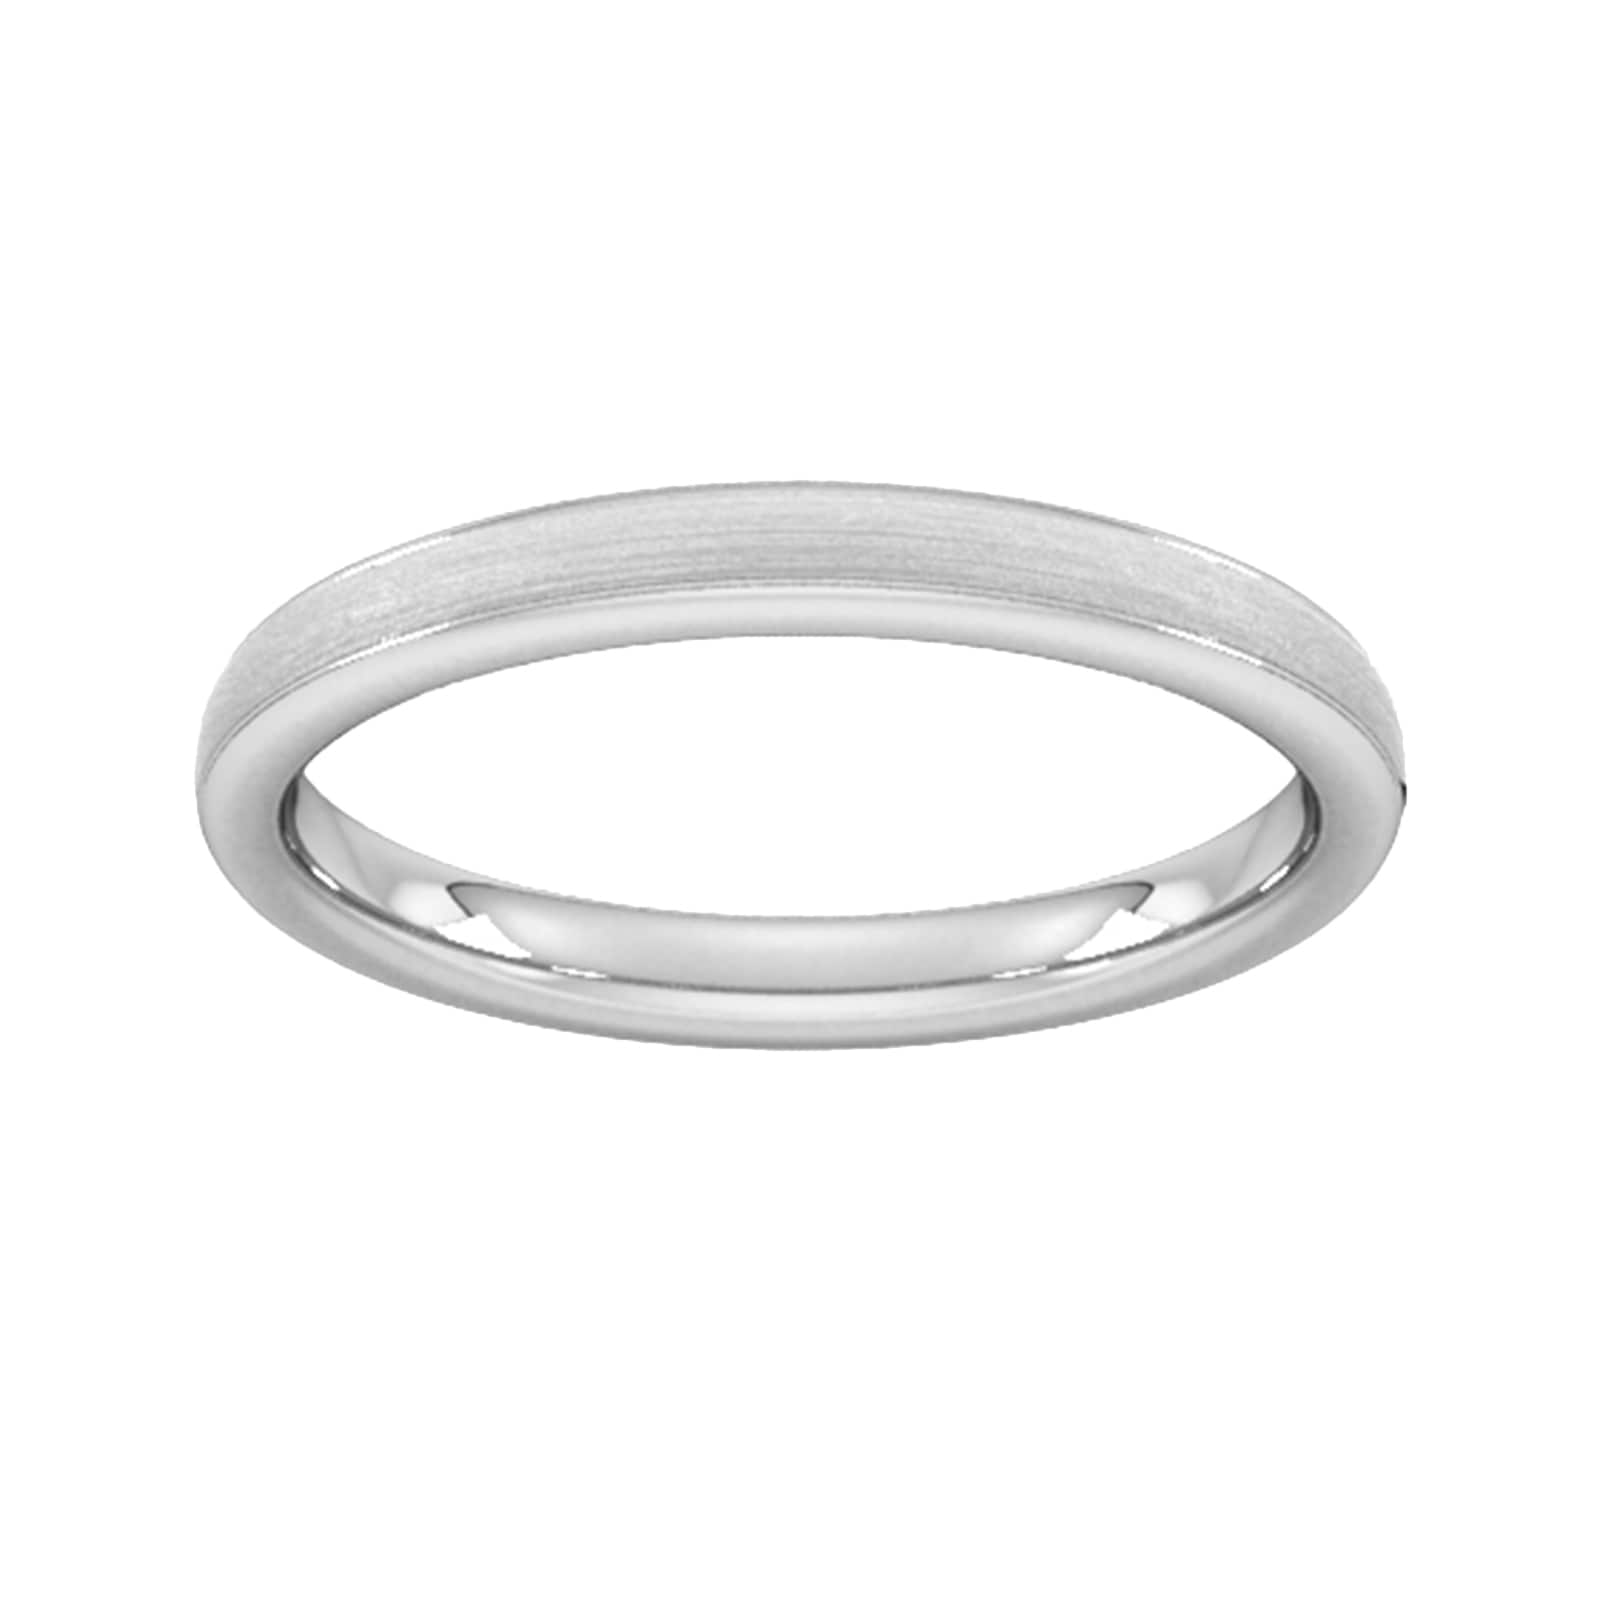 2.5mm D Shape Standard Matt Centre With Grooves Wedding Ring In 9 Carat White Gold - Ring Size L